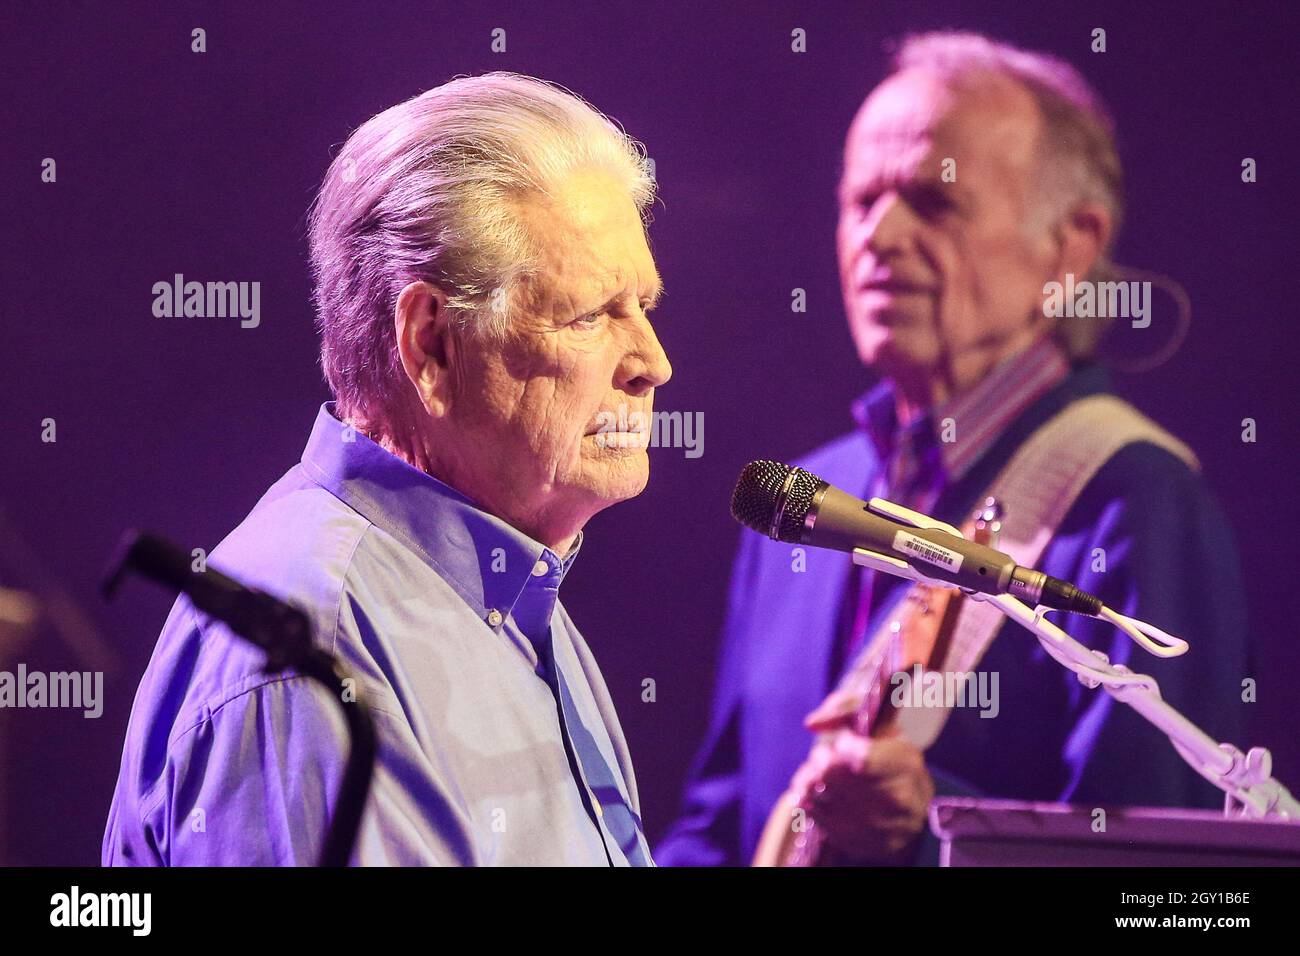 Brian Wilson, co-founder of the Beach Boys, performs in concert at the Paramount on October 5, 2021 in Huntington, New York. Stock Photo